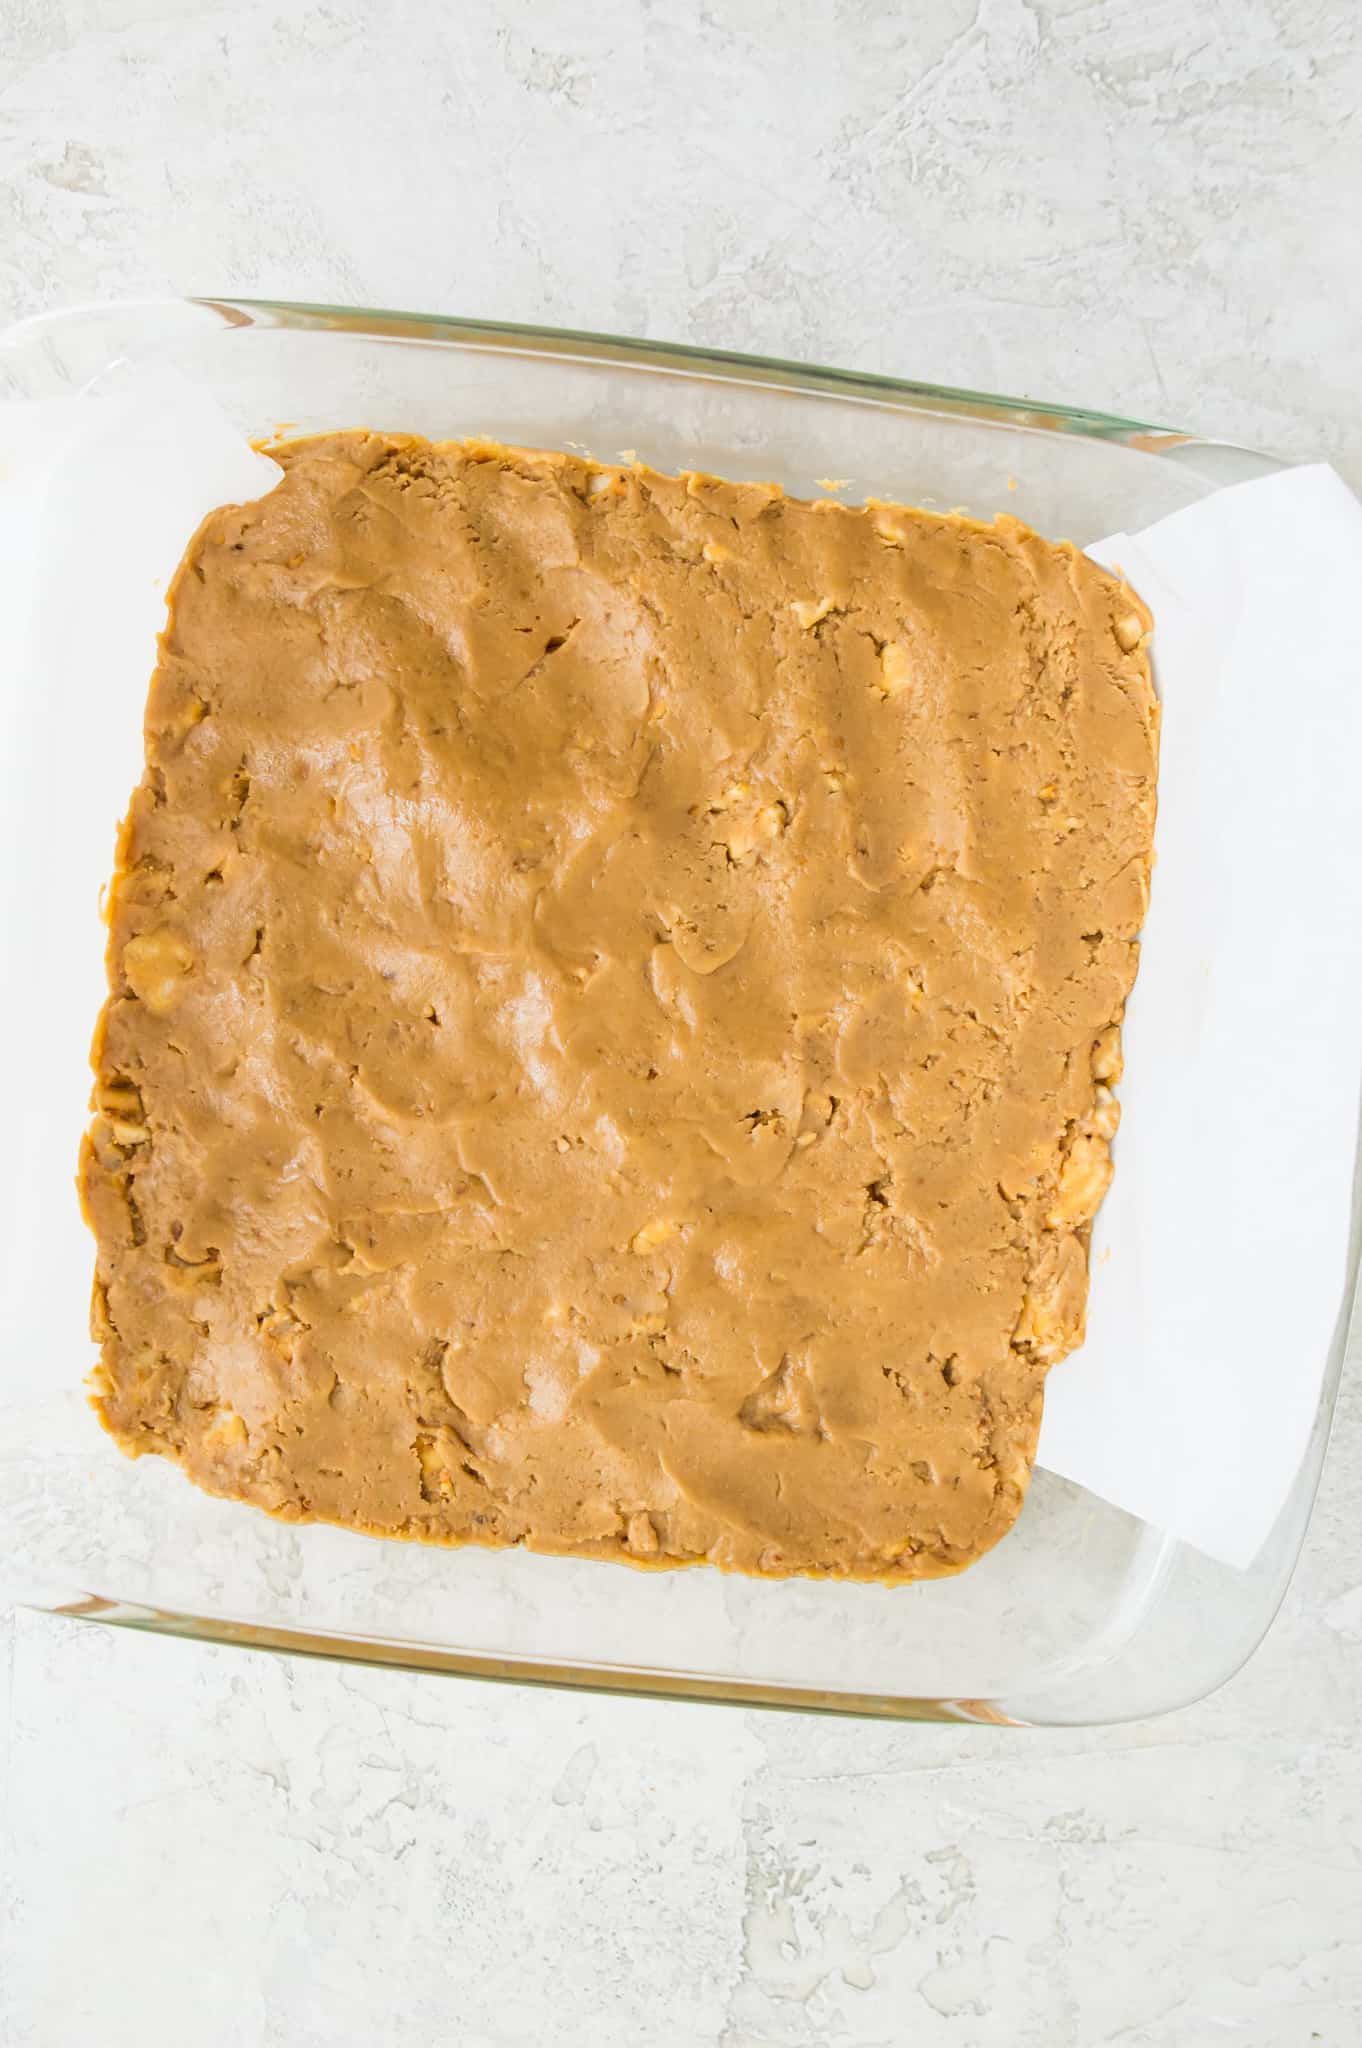 A baking pan with peanut butter pressed into it.